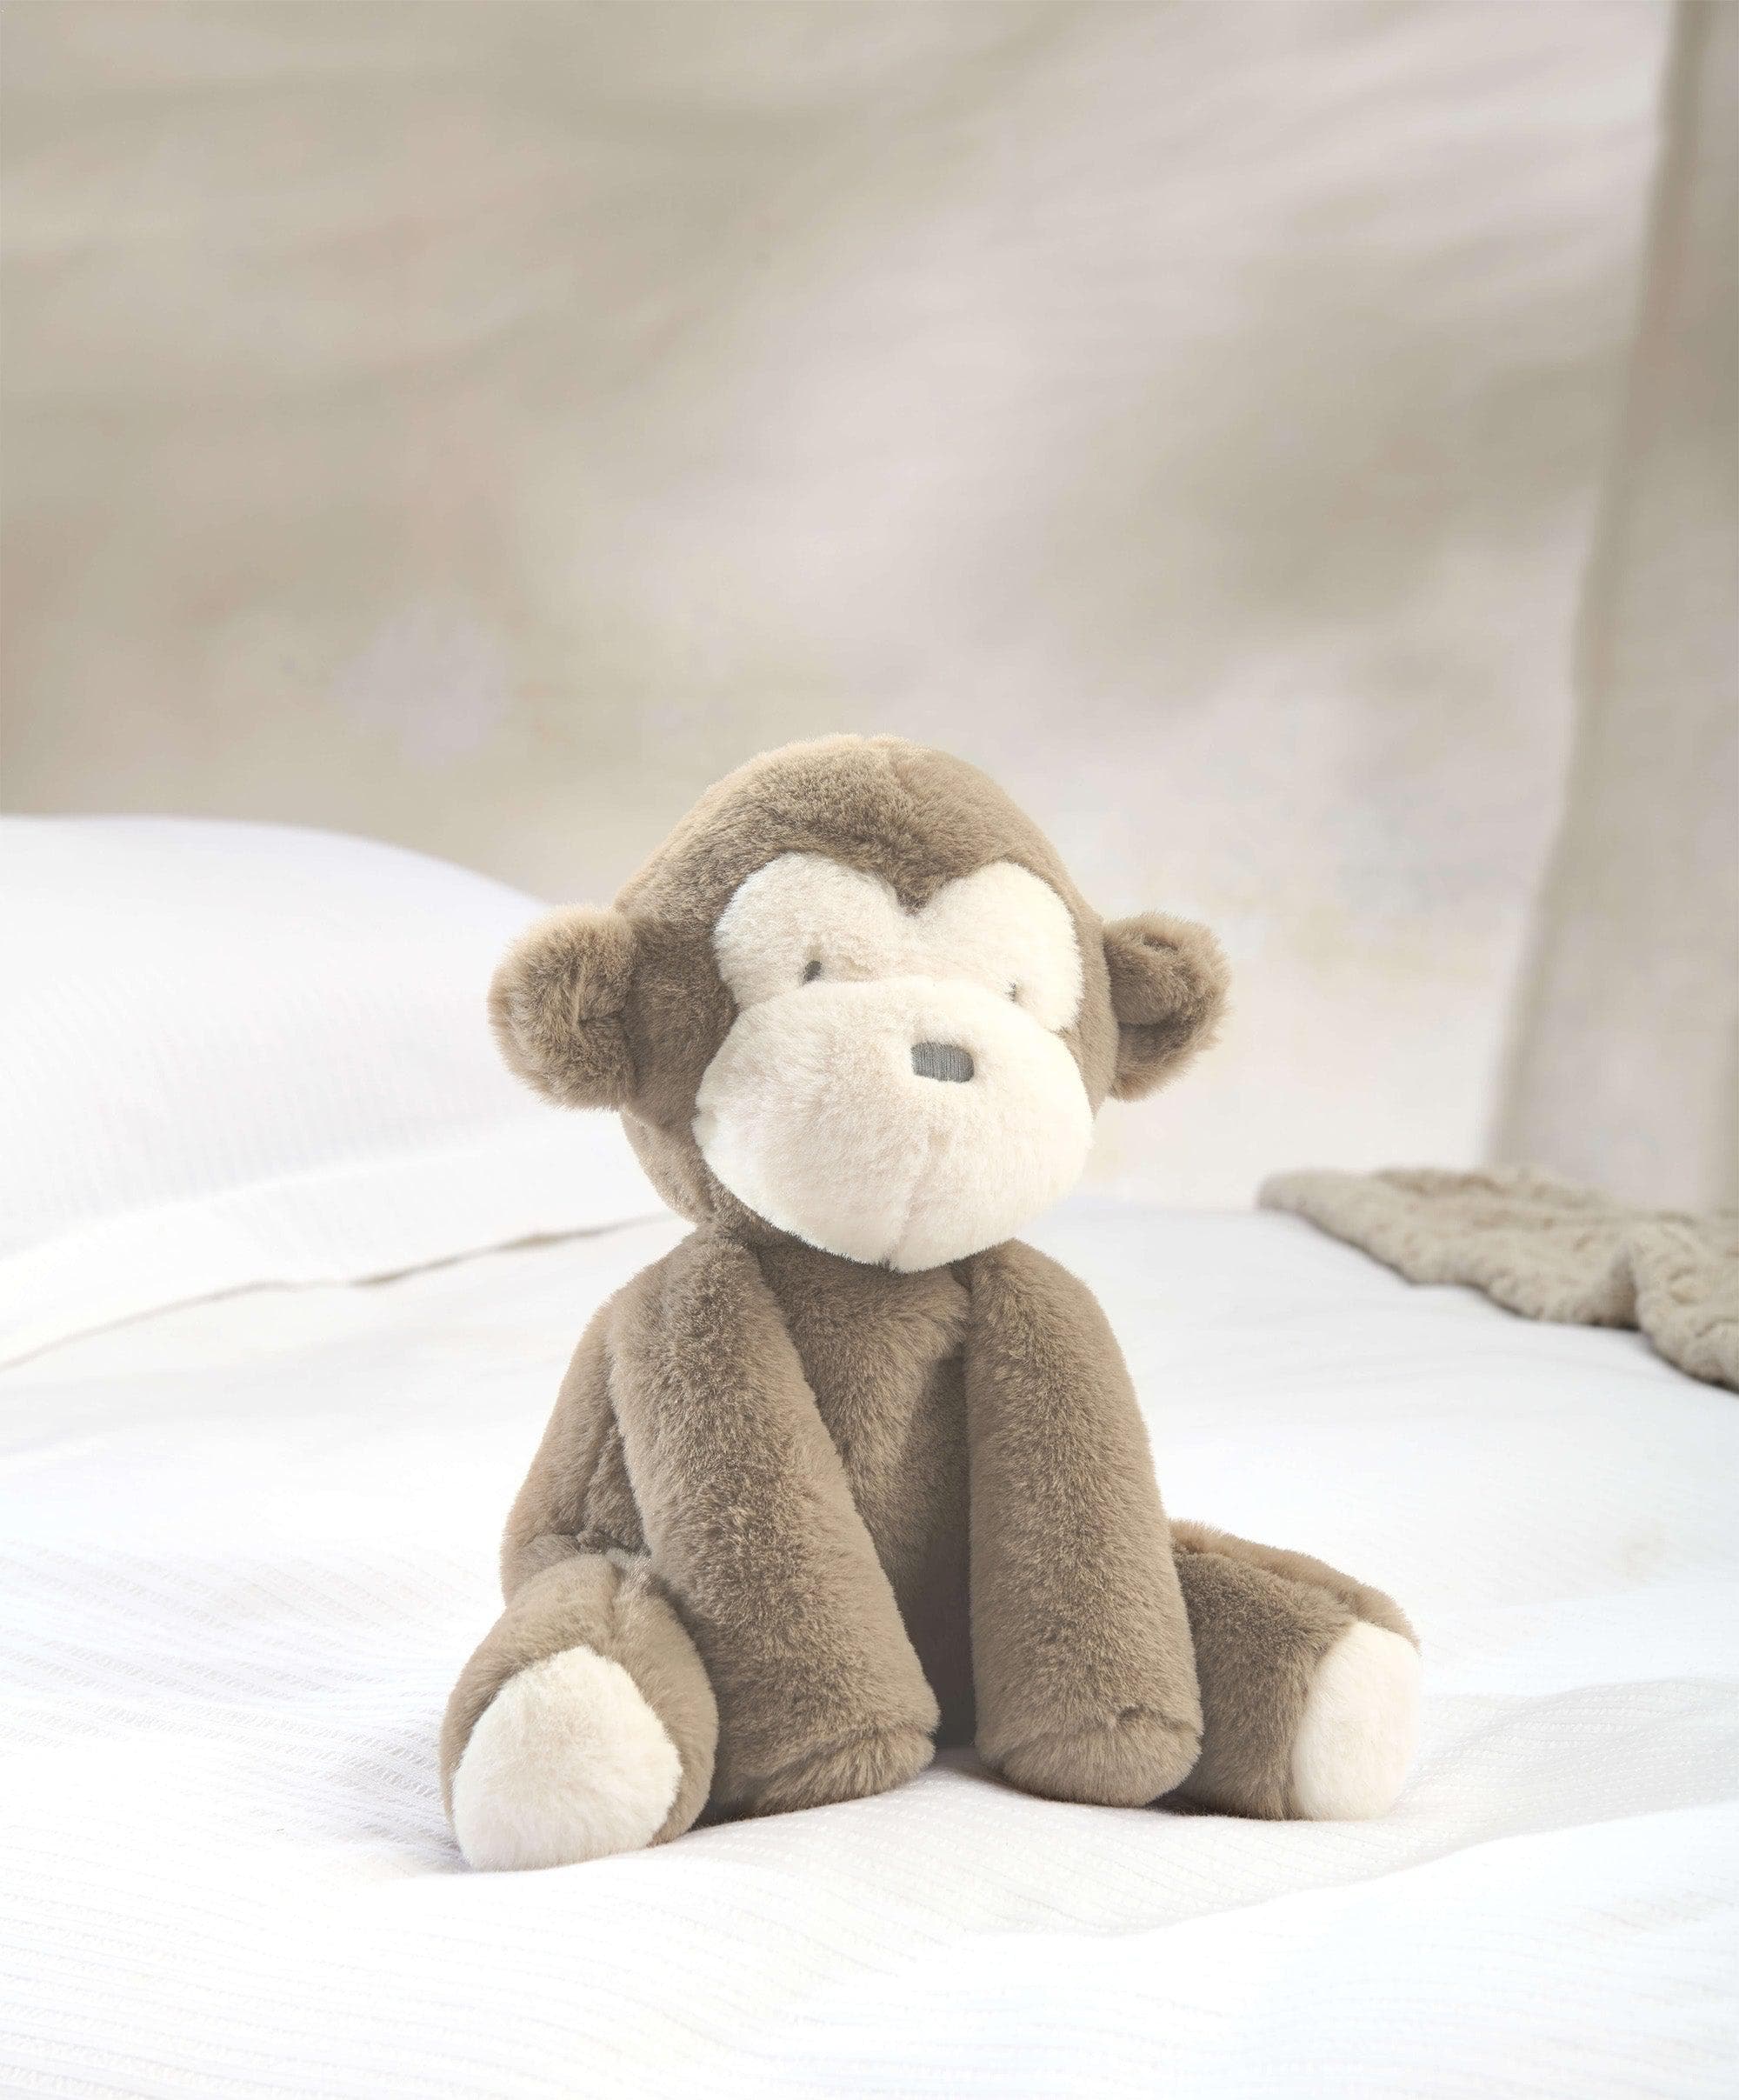 Mamas & Papas Welcome to the World Large Soft Toy - Monty Monkey